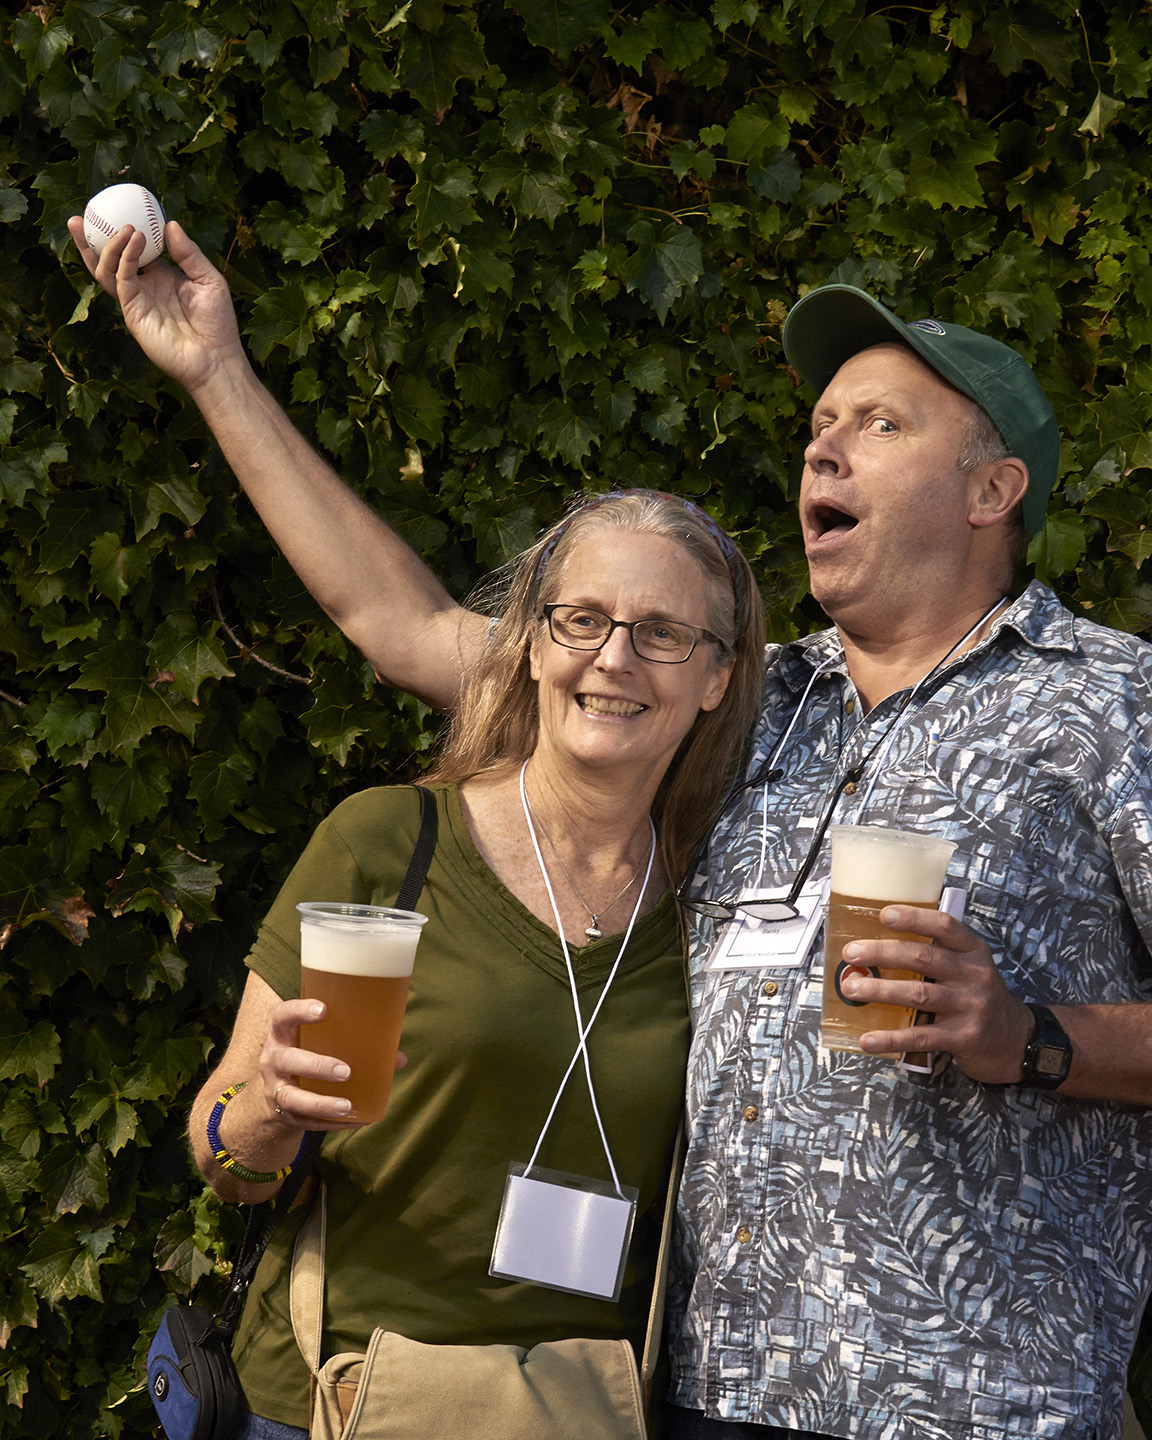 Evidencing his legendary dexterity, Bill manages to catch a fly ball while simultaneously cuddling Mary Anne and holding a beer at the “The Field at the Field!” event held at Wrigley Field in August 2014. Field Museum photo by John Weinstein. GN92026_234d